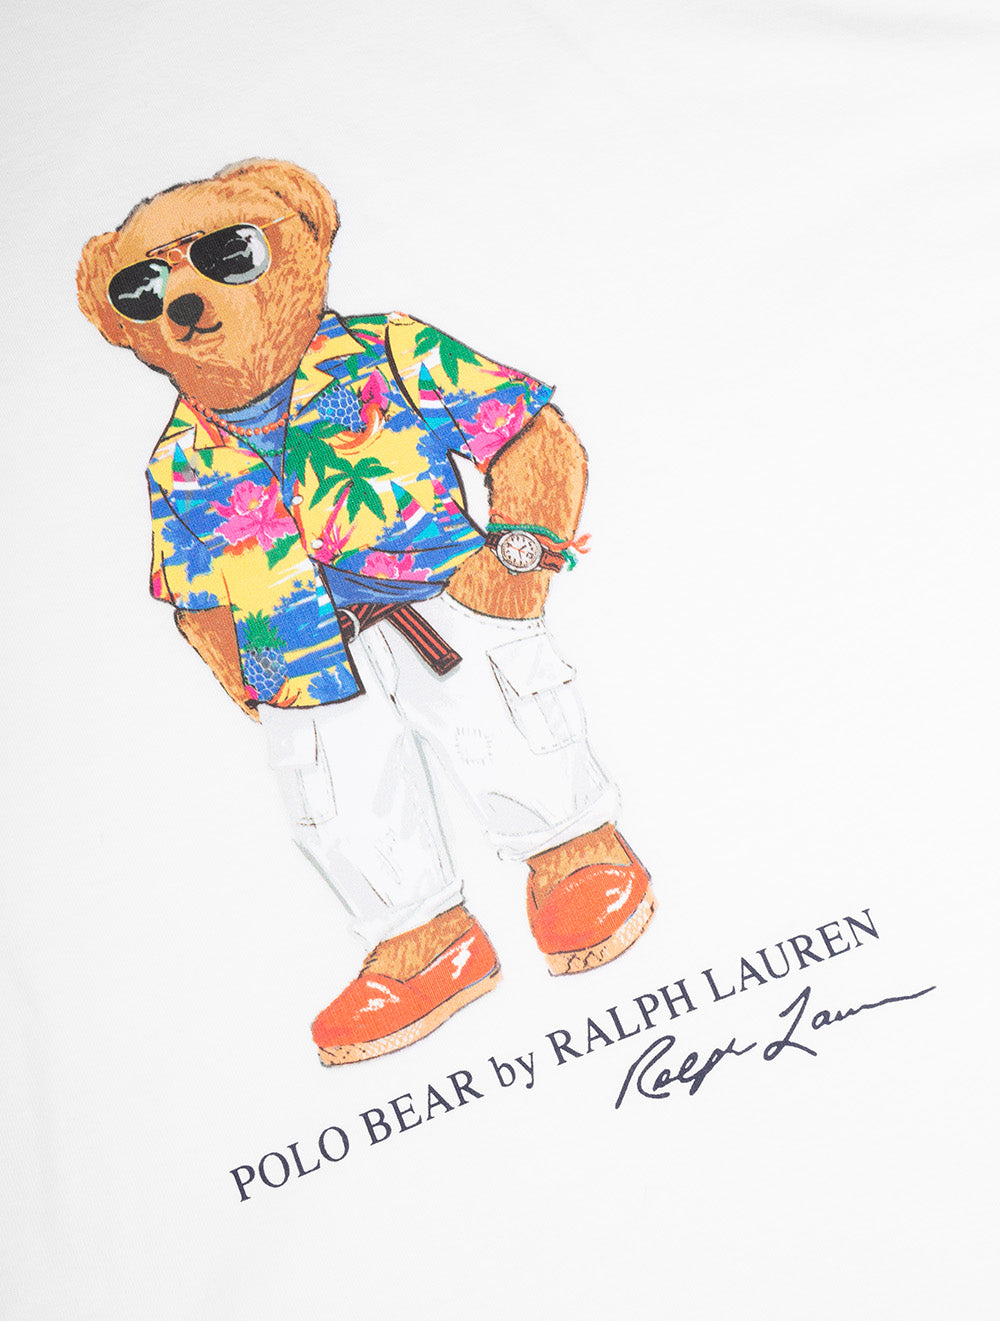 Classic Fit Polo Bear Jersey T-Shirt White